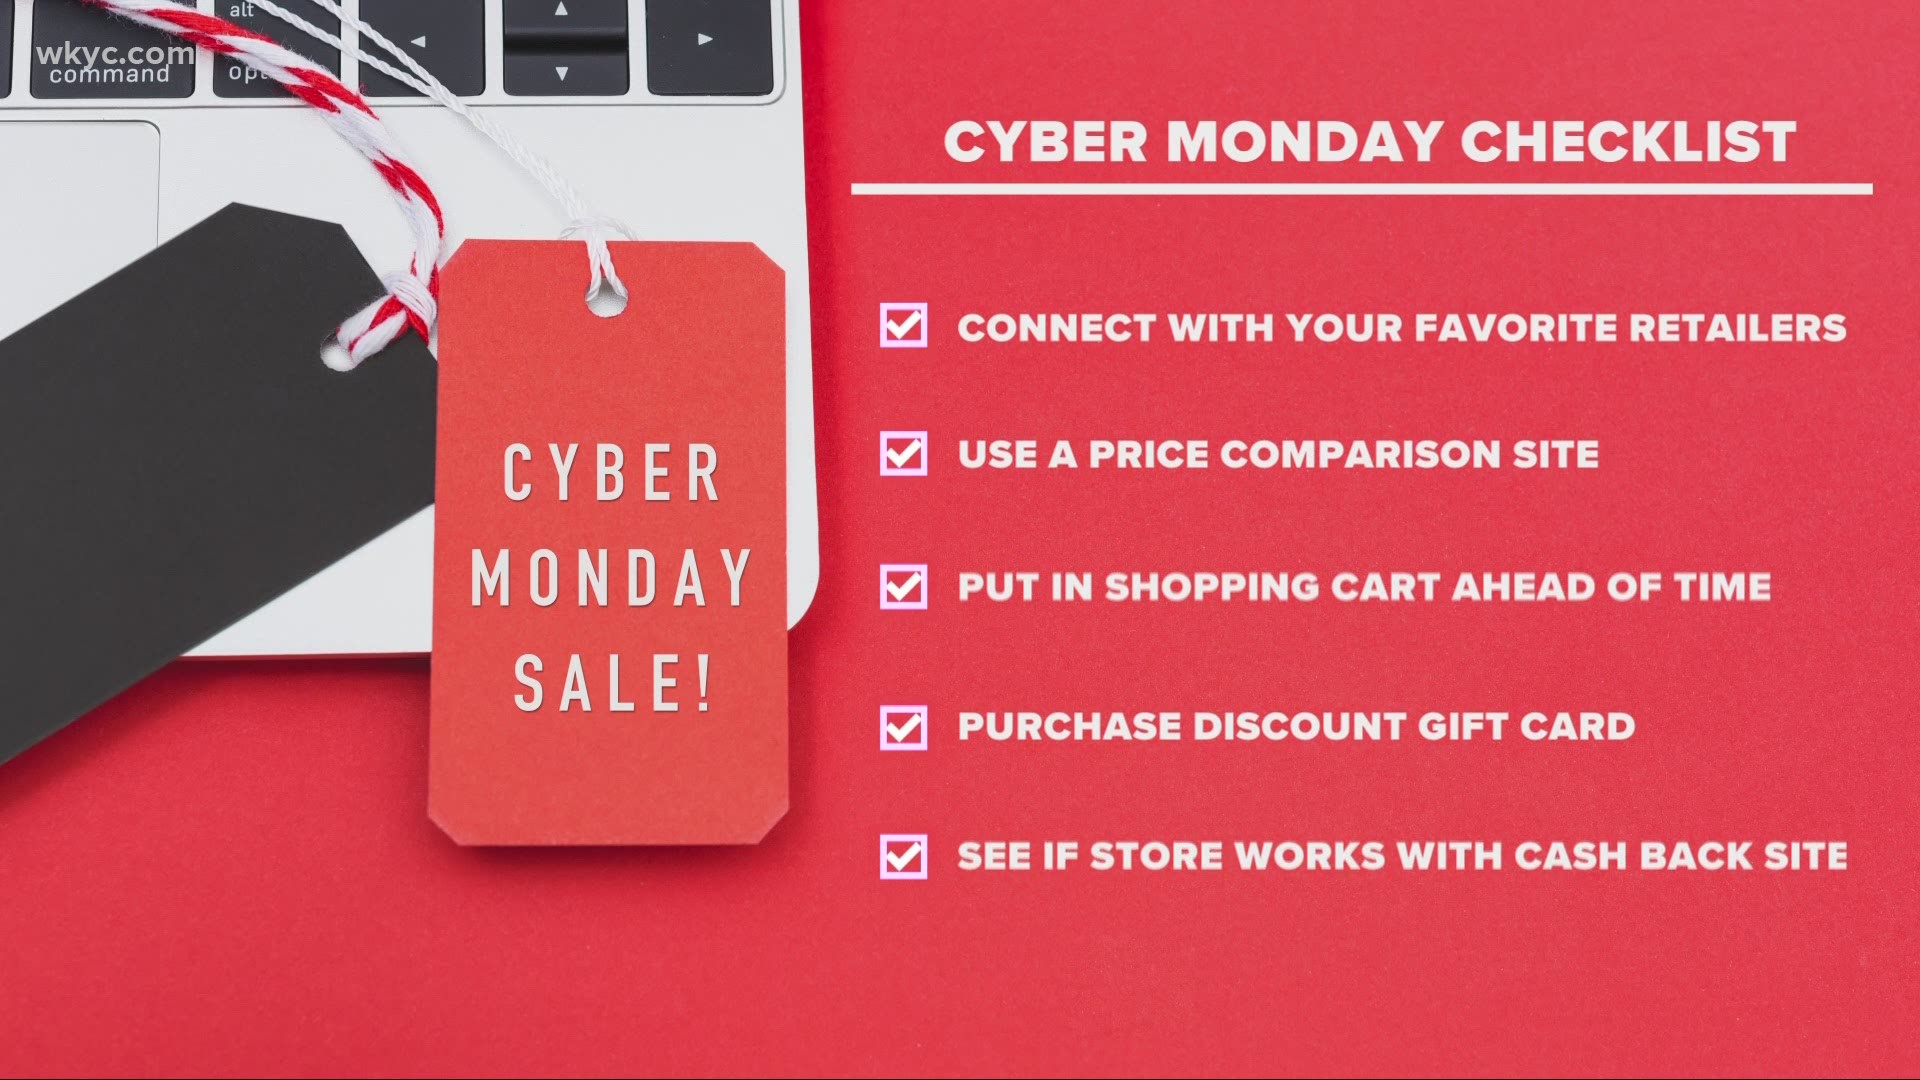 Cyber Monday is no longer a one-day event. Consumer Investigator Danielle Serino has some tips to help you shop smart.